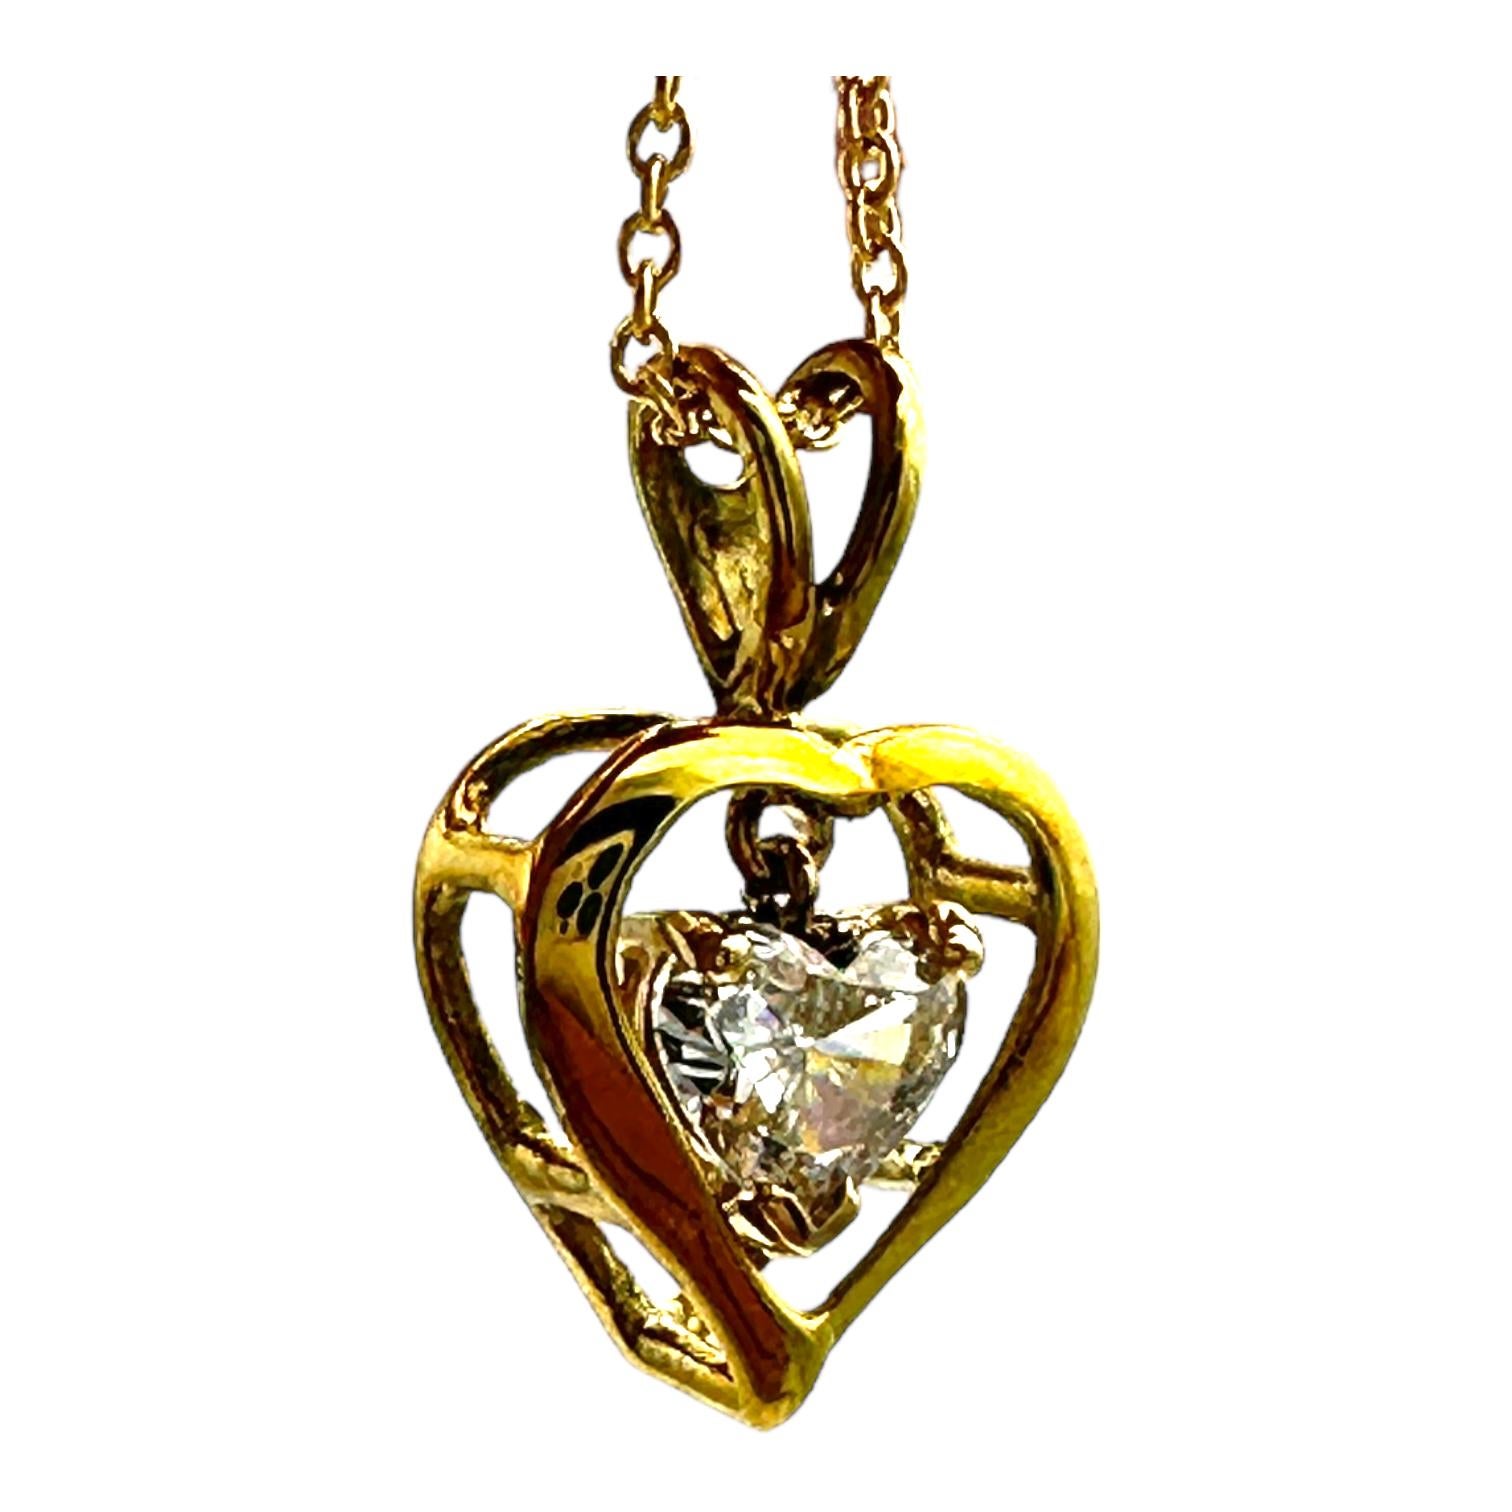 .35 Carat Heart Diamond Pendant Yellow Gold VS Quality In New Condition For Sale In Laguna Hills, CA